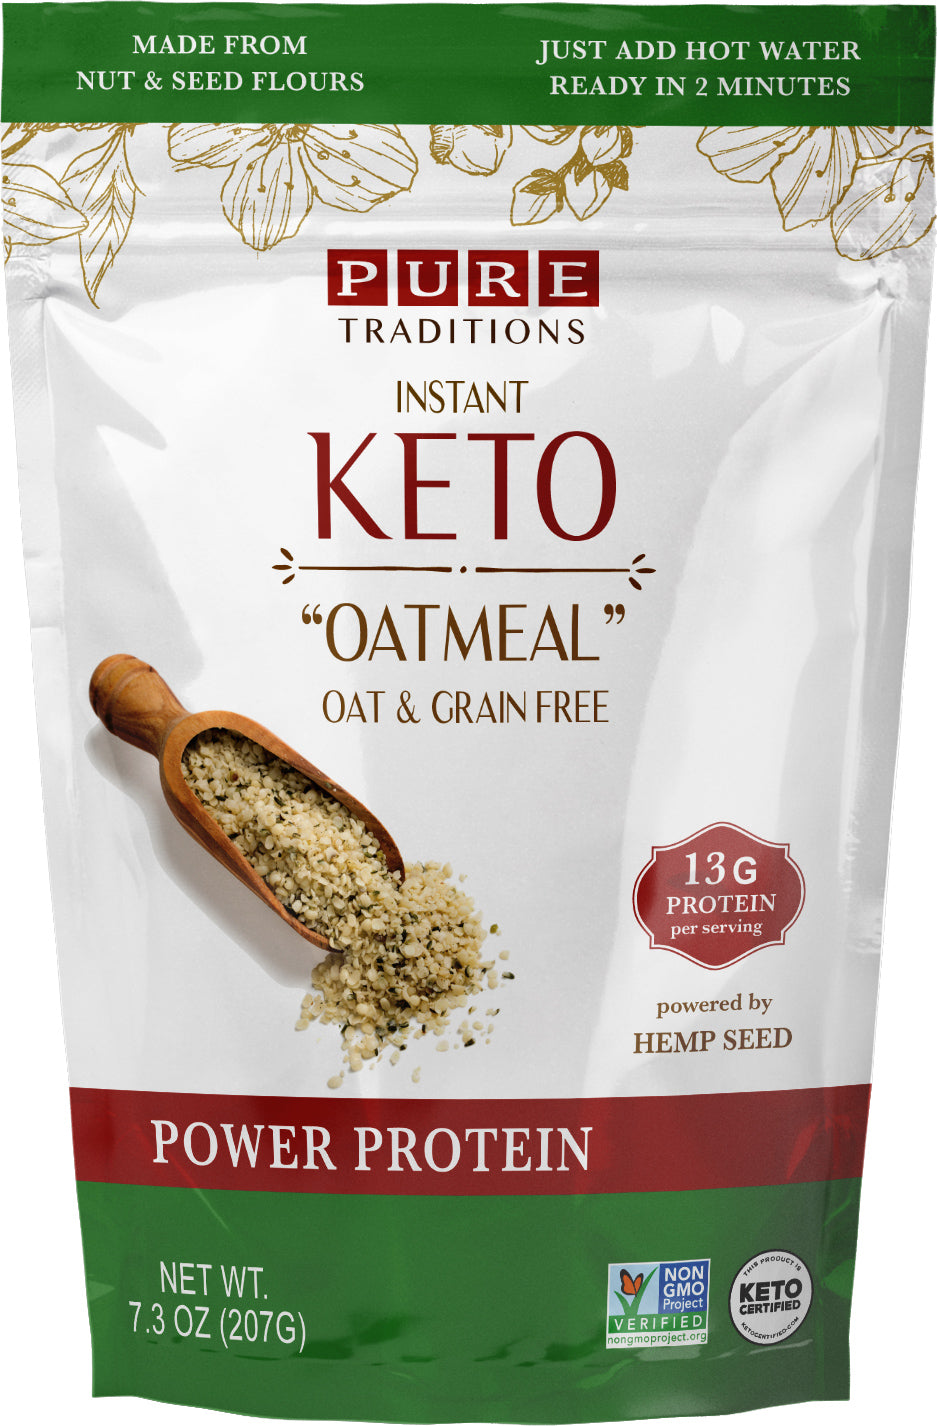 Instant Keto Oatmeal, Power Protein (13g Protein per serving)